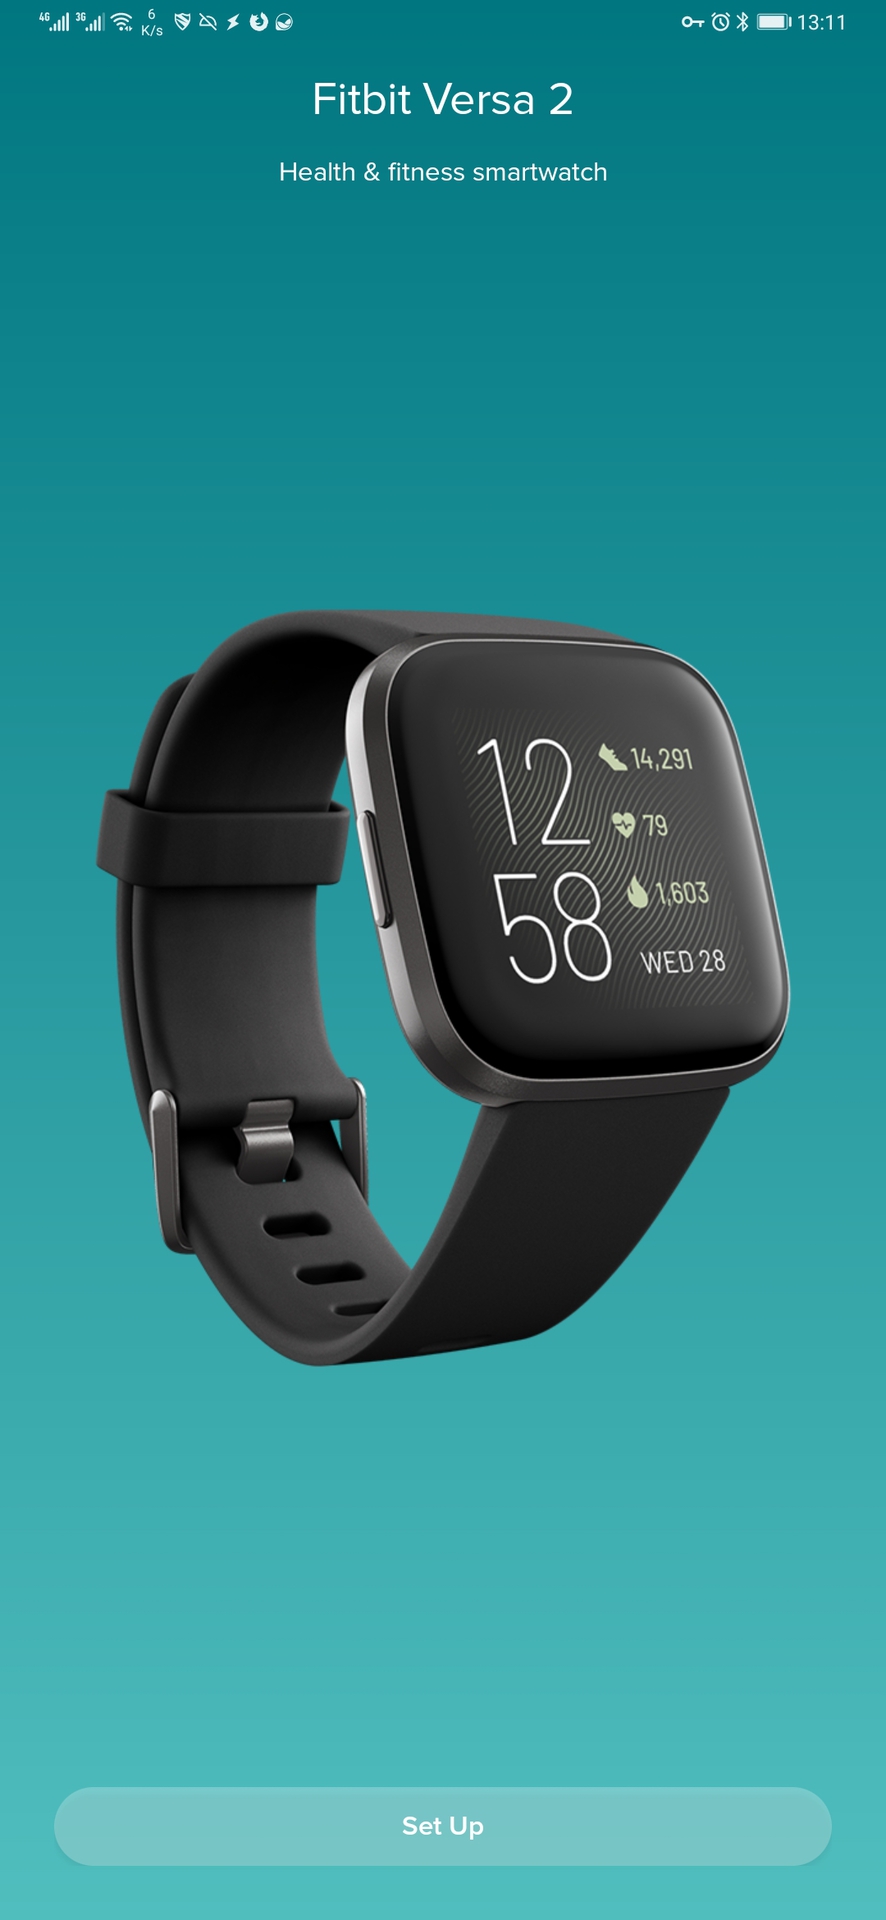 Here's how to set up Fitbit devices 